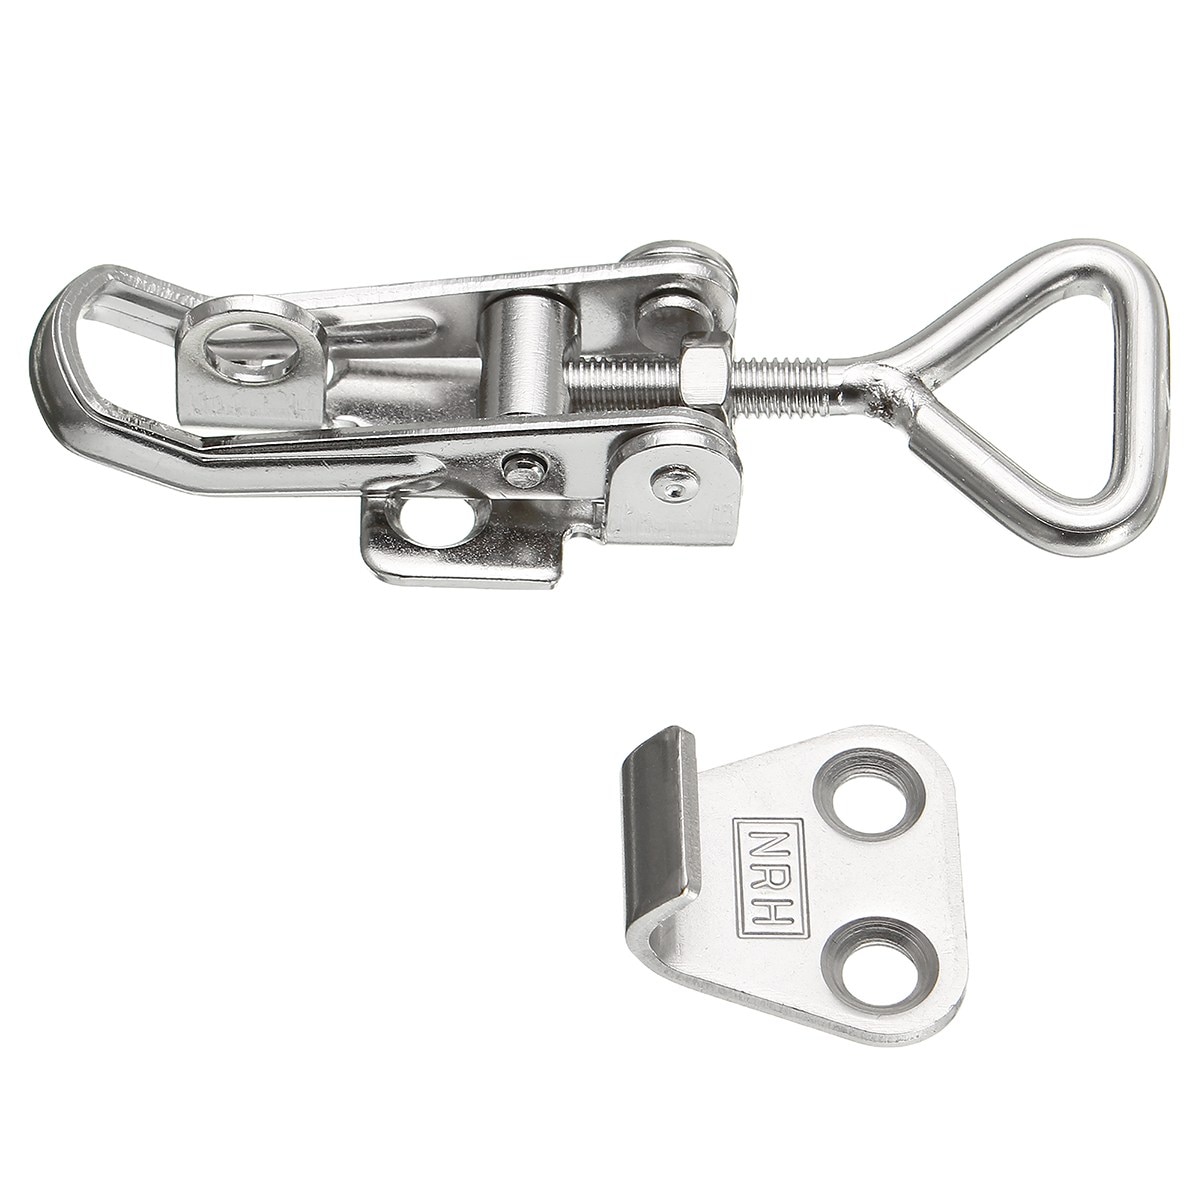 Spring Loaded Toggle Case Box Chest Trunk Latch Catches Hasp Durable Stainless Steel